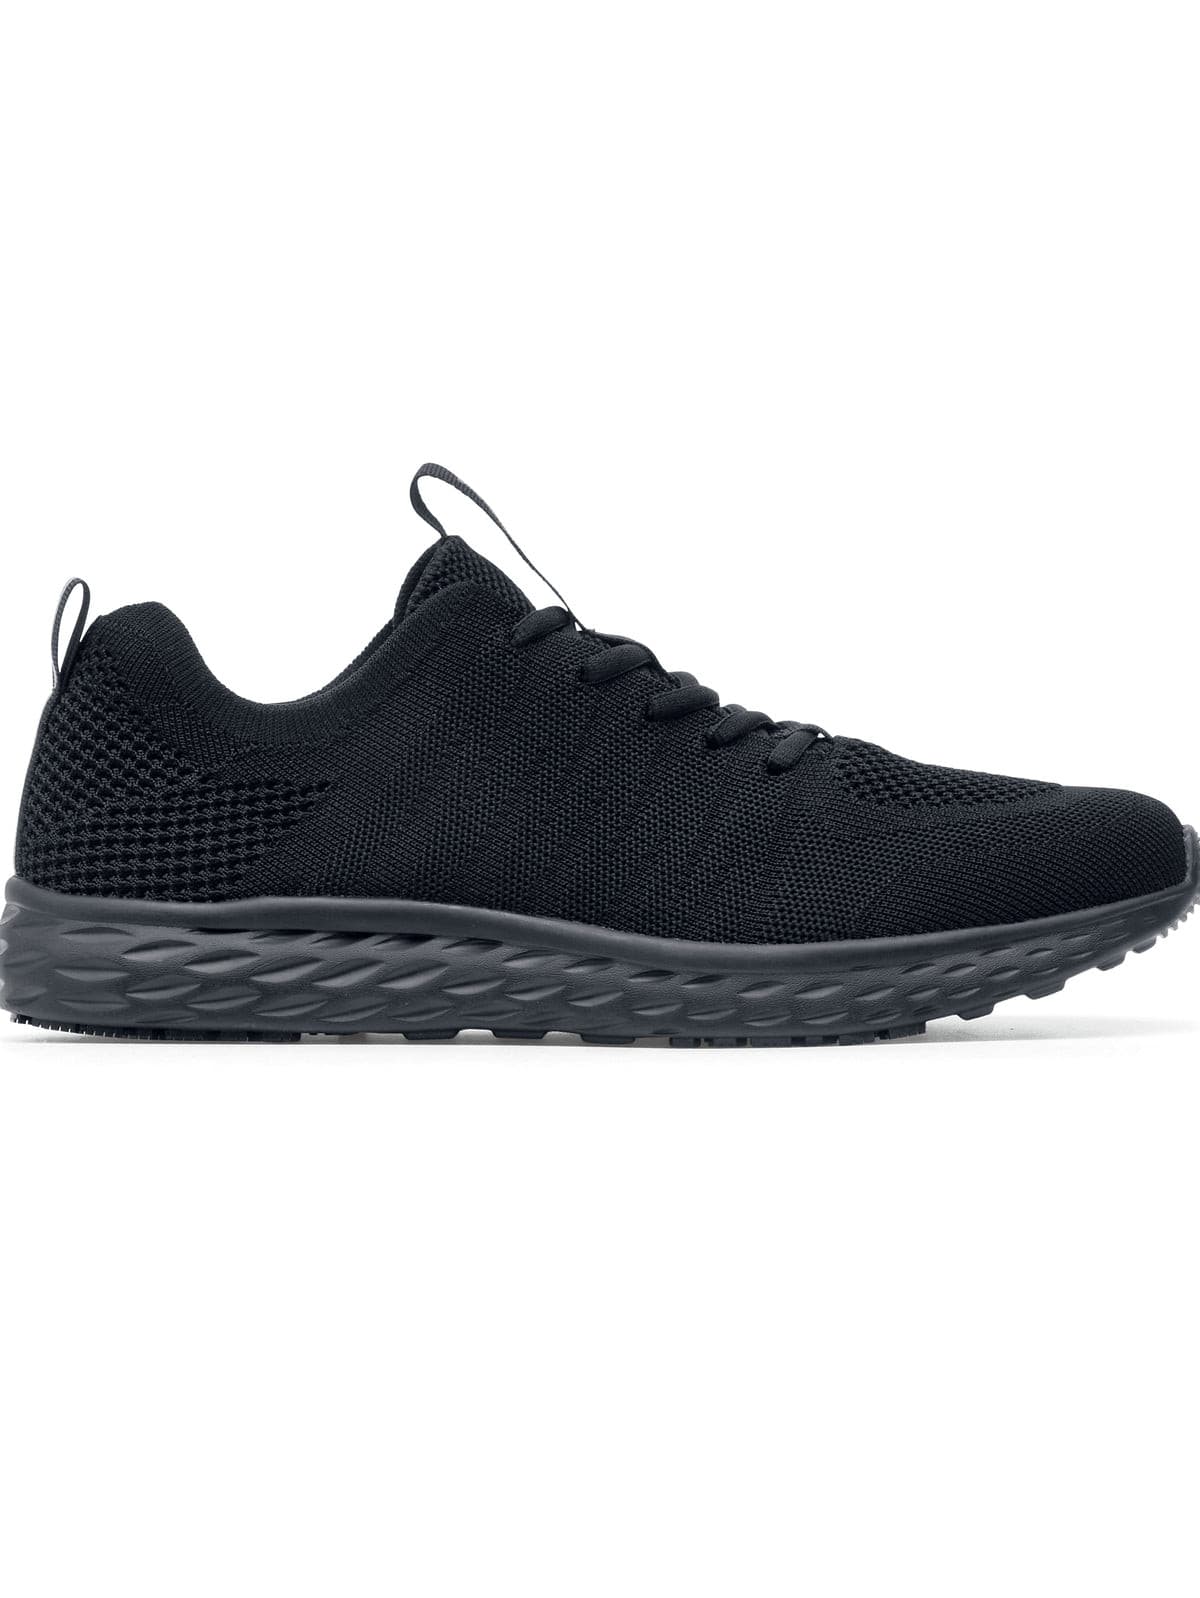 Women's Work Shoe Everlight Black by Shoes For Crews -  ChefsCotton